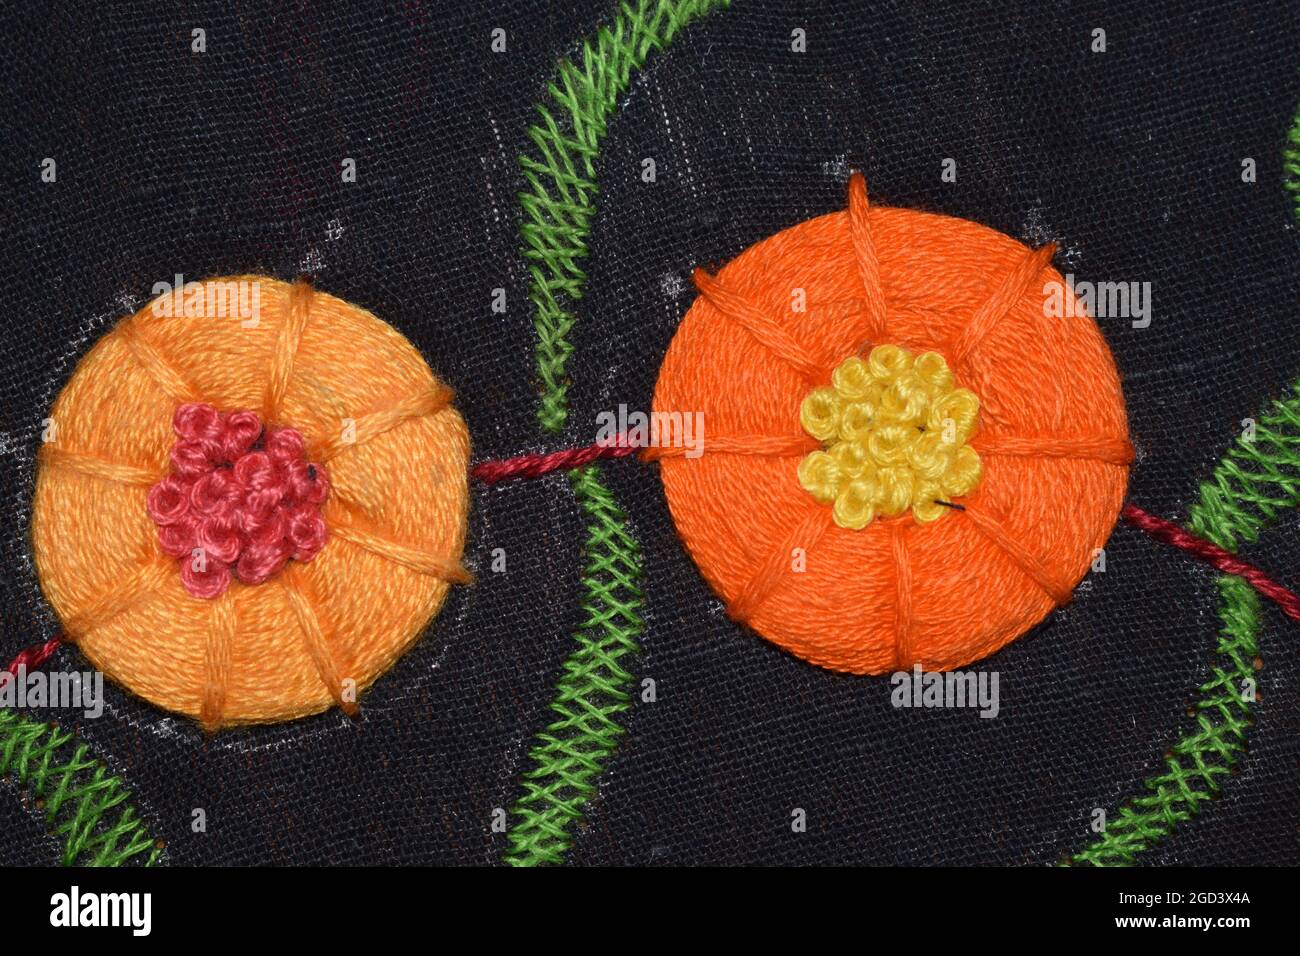 Hand embroidery flower design with side wound stitches on the fabric with long fishbone stitch leaves Stock Photo